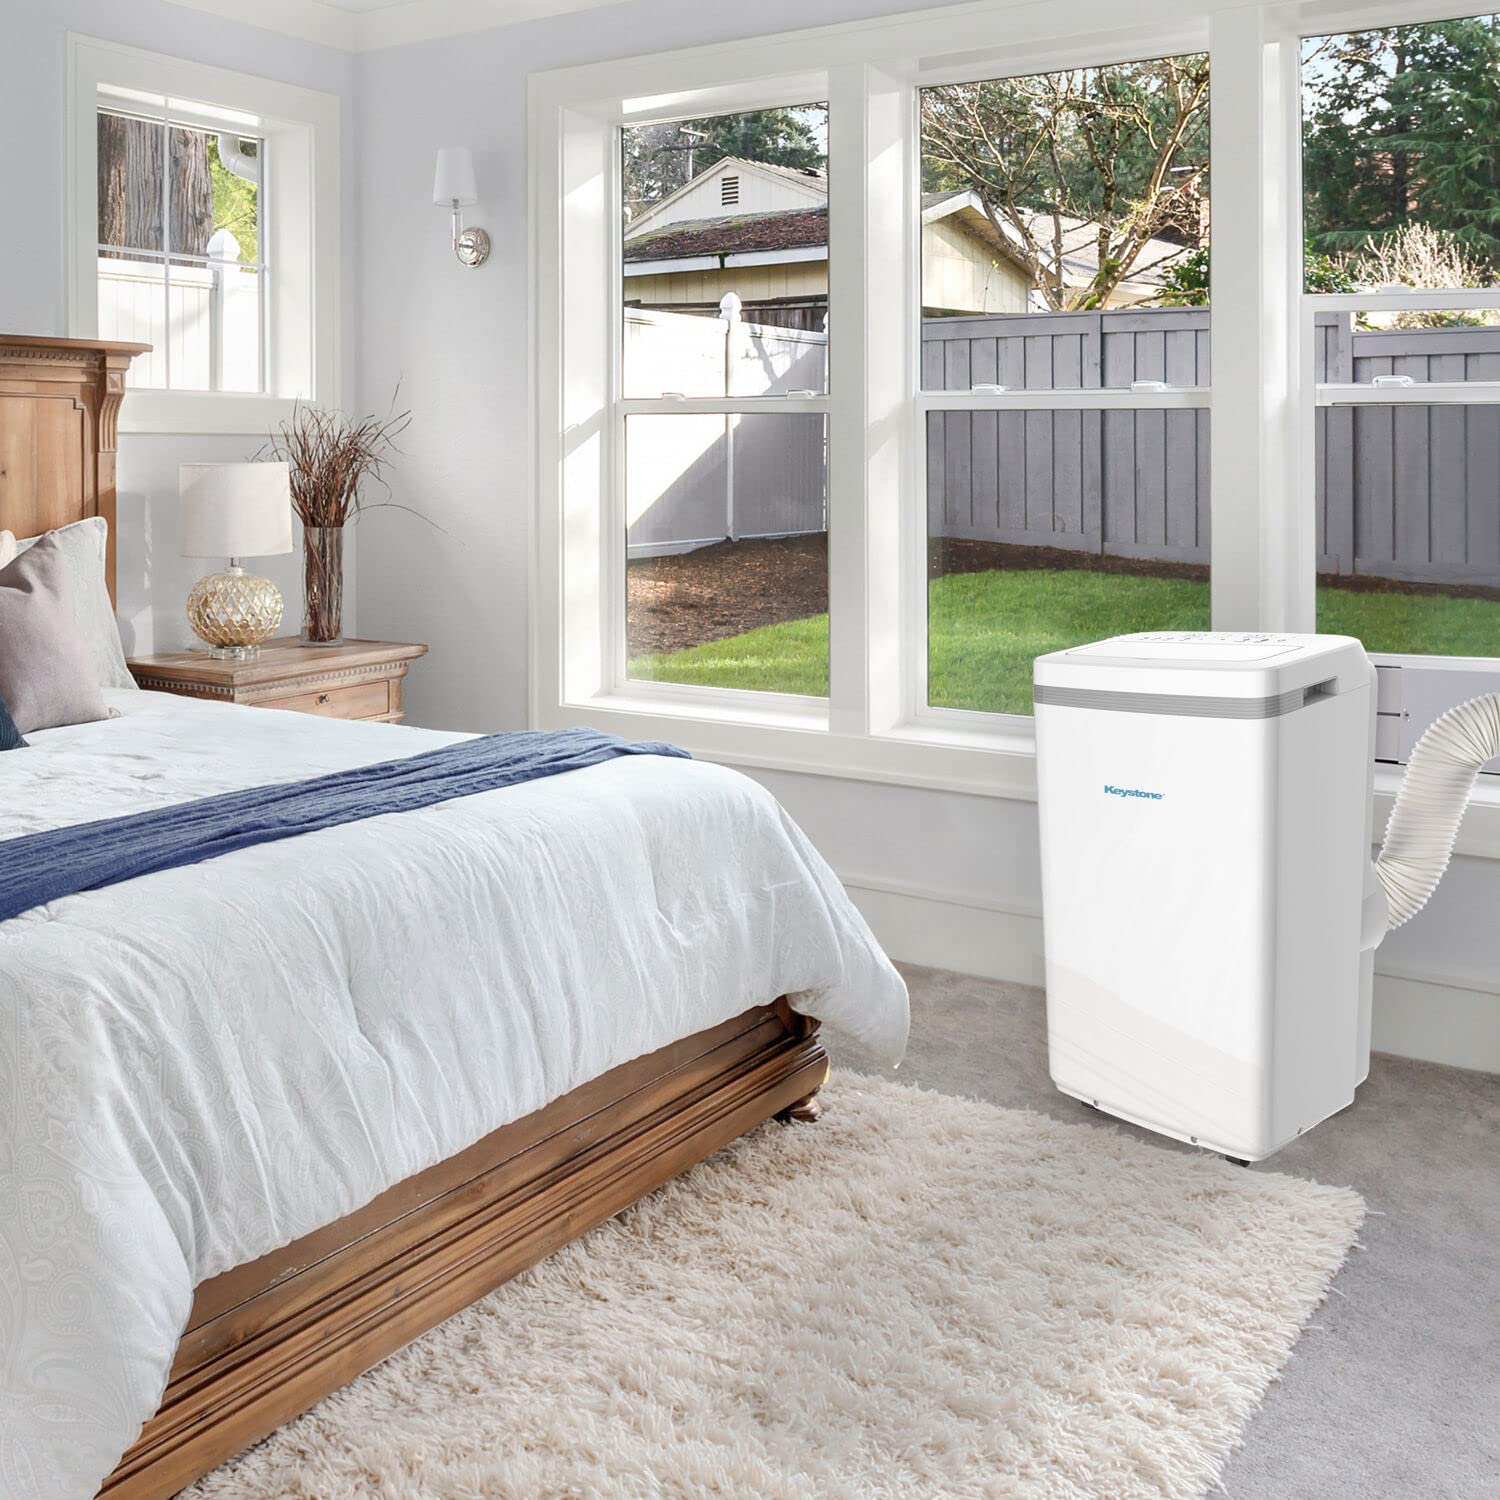 Keystone 13,000 BTU Portable Air Conditioner and Heater with Smart Remote Control & Dehumidifier Function, Quiet Compact Portable AC & Heater Combo for Living Room & Small Rooms up to 450 Sq. Ft